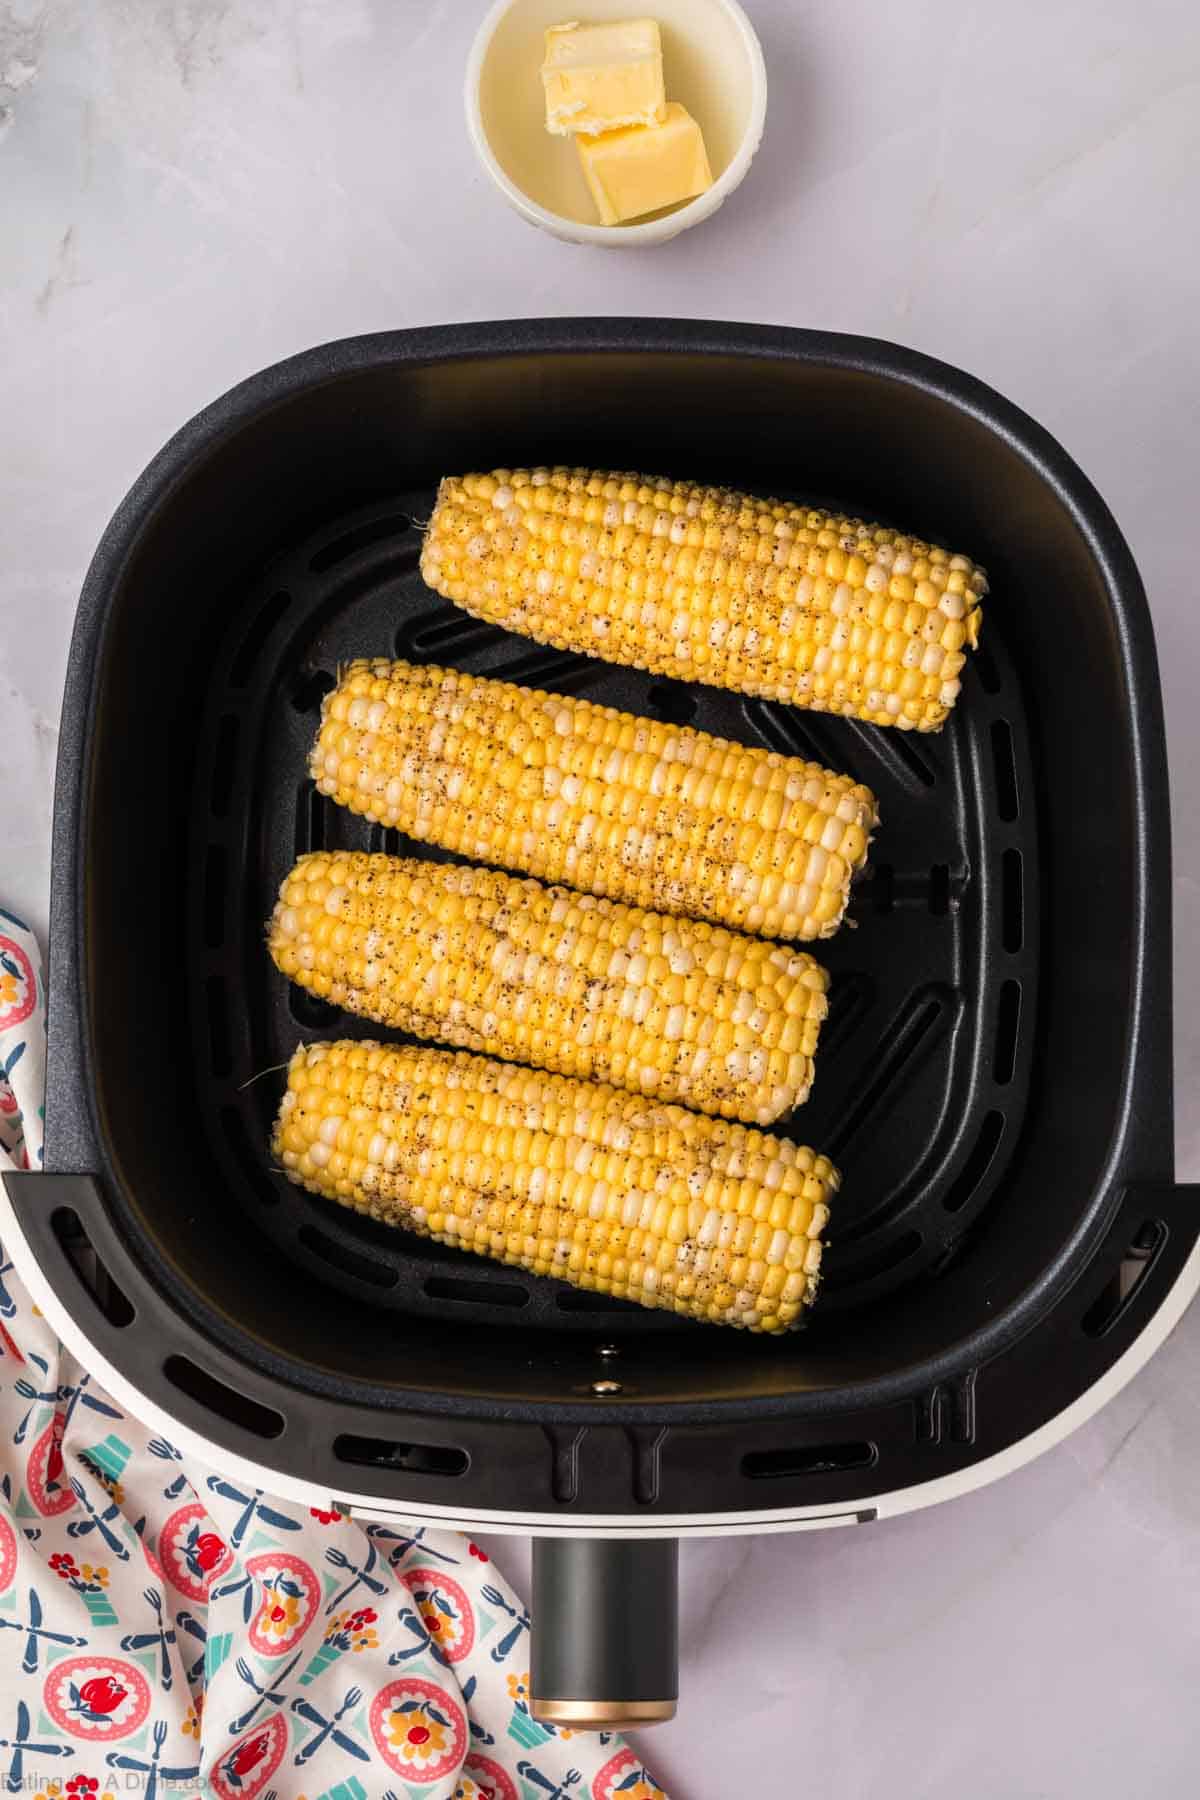 Four seasoned Air Fryer Corn on the Cob pieces stand vertically inside the basket. In the background, there's a bowl of butter, and to the left, a colorful patterned cloth napkin adds a pop of color.